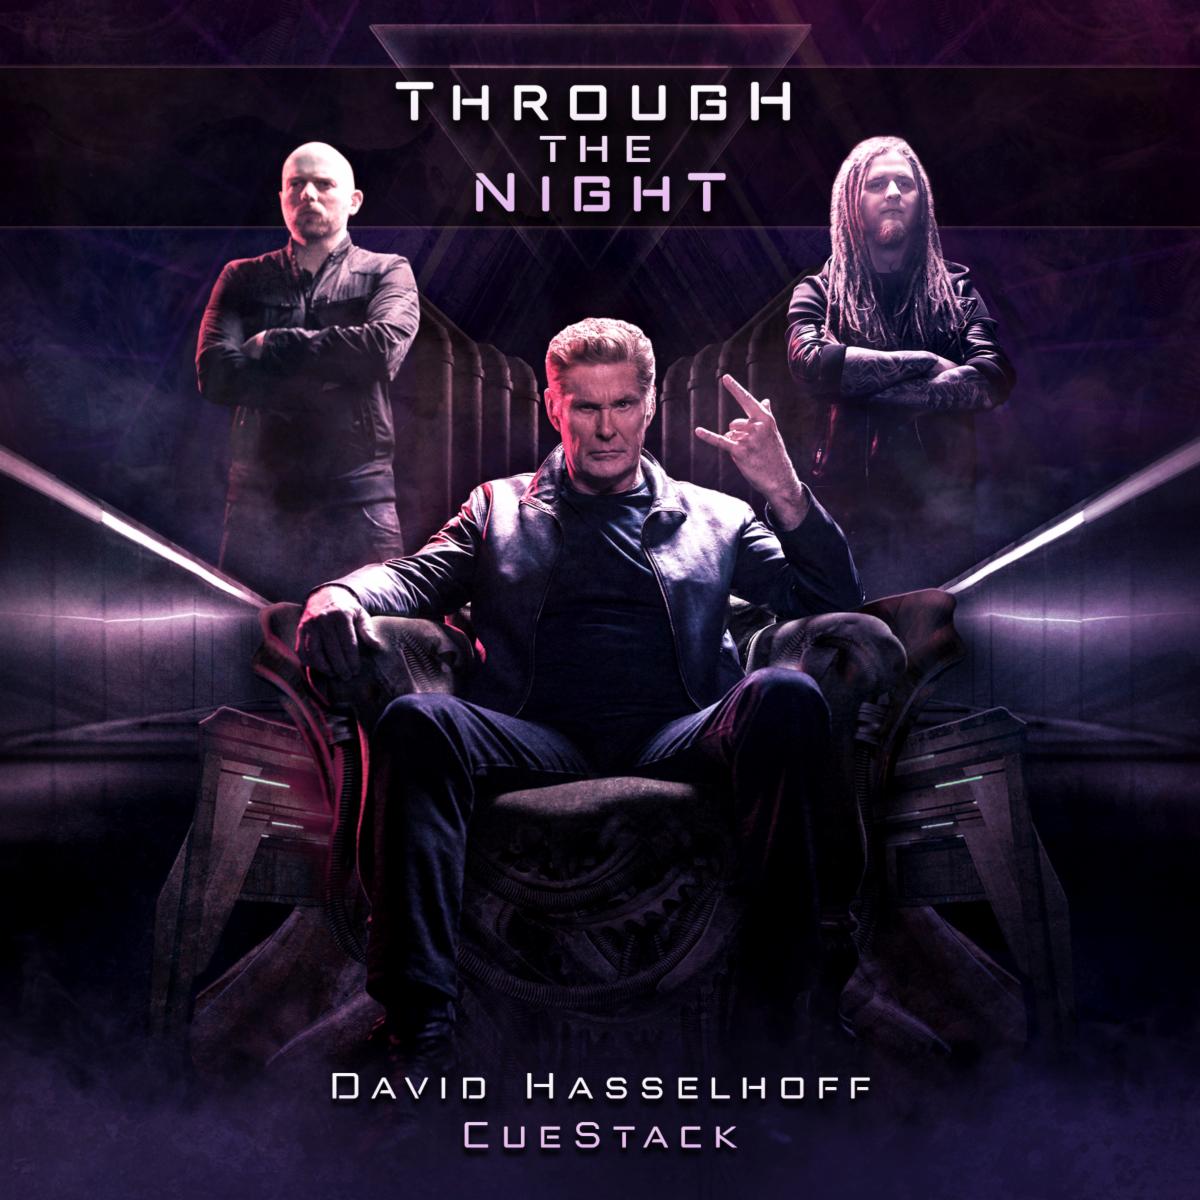 David Hasselhoff Goes Heavy Metal on “Through The Night” with Two-Man Metal Band CUESTACK